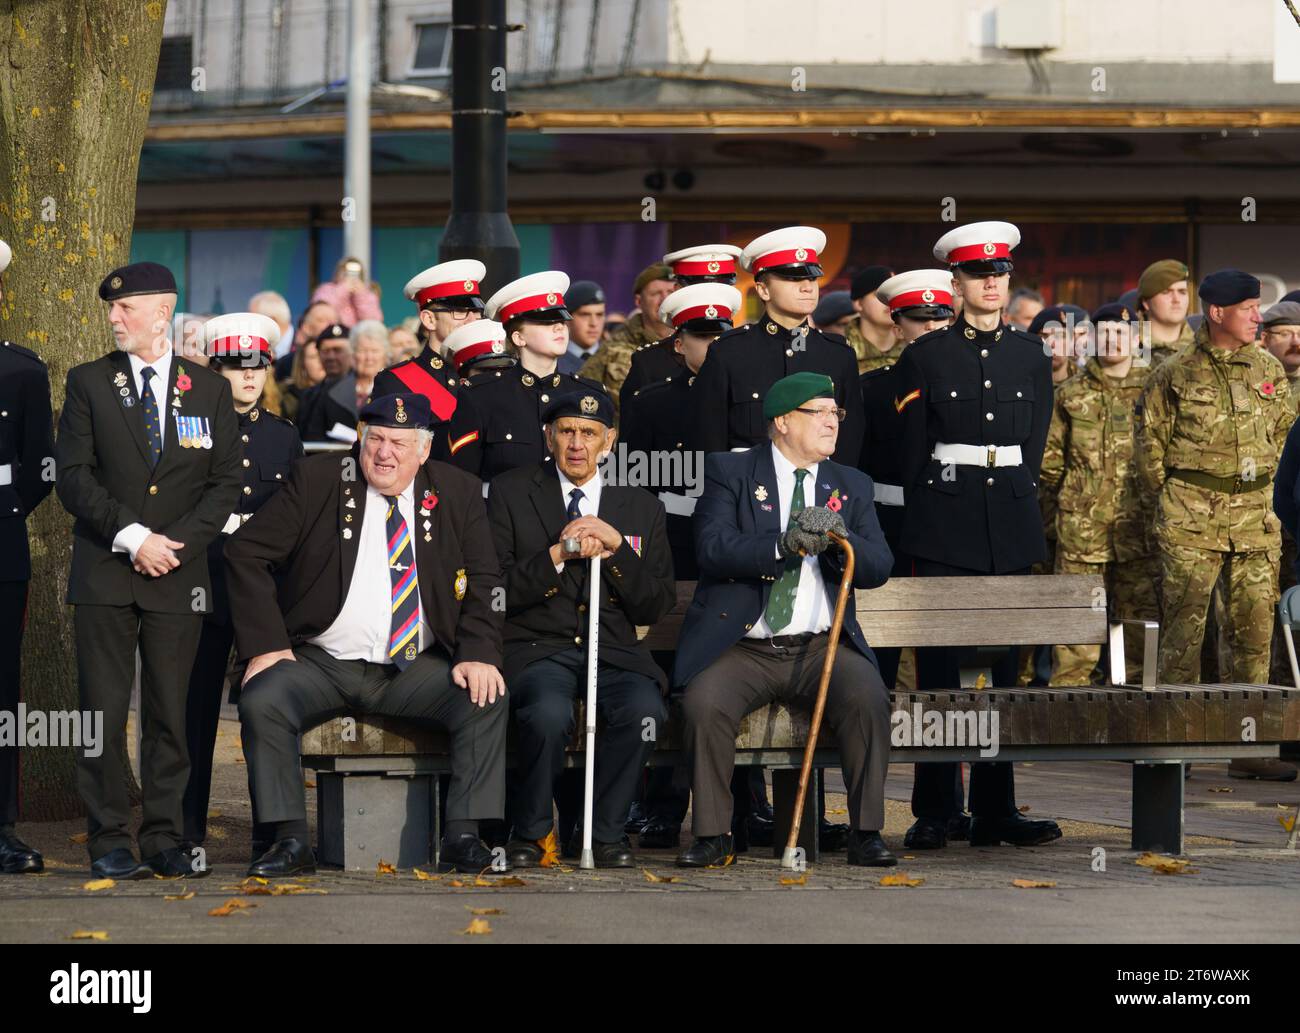 Hull, E. Yorkshire, November 12th. The people of Hull and East Yorkshire paid their respects at this year's Remembrance Day commemorations in the city centre, to the millions of people who lost their lives in conflict. Civic heads and dignitaries, a police band, and members from a number of veterans associations and  serving members of the armed forces, along with St Johns Ambulance and the blue light services, were in attendance. PICTURED: Bridget Catterall AlamyLiveNews Stock Photo